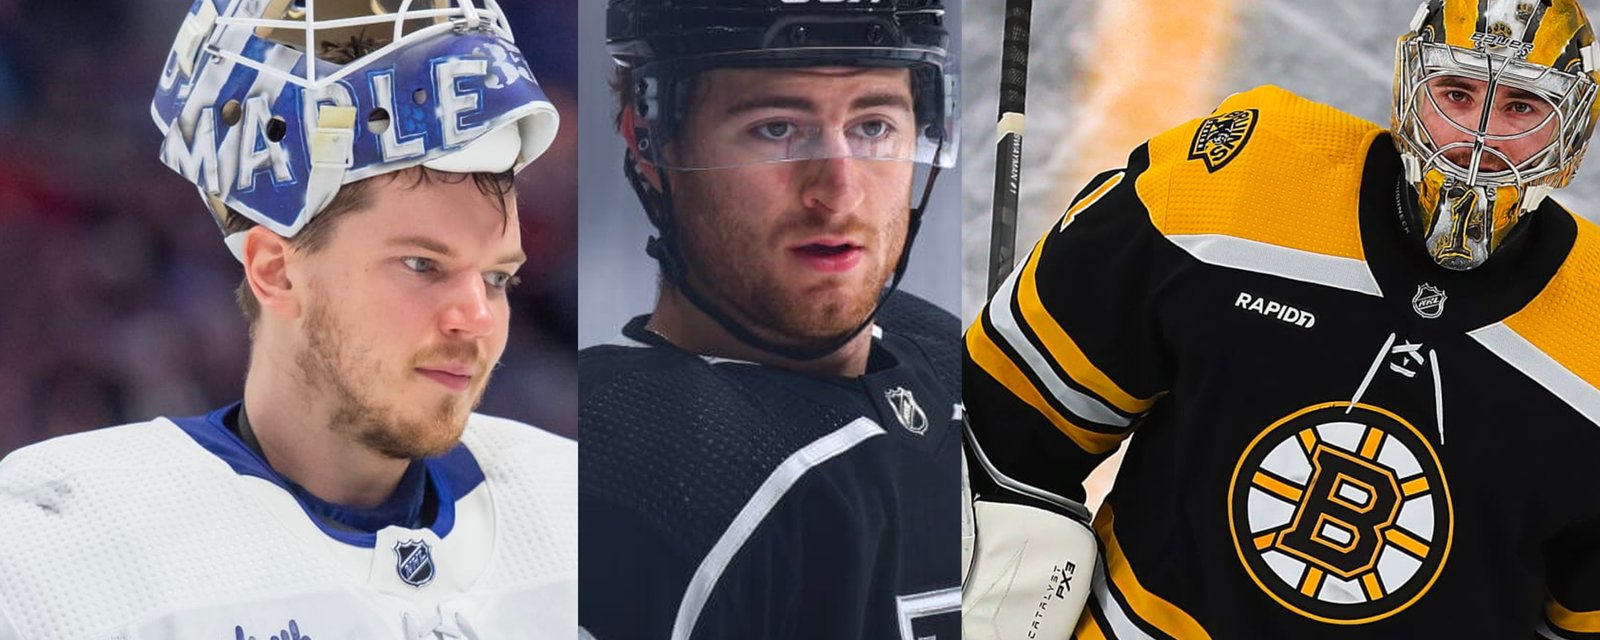 A group of 22 NHL players have filed for salary arbitration